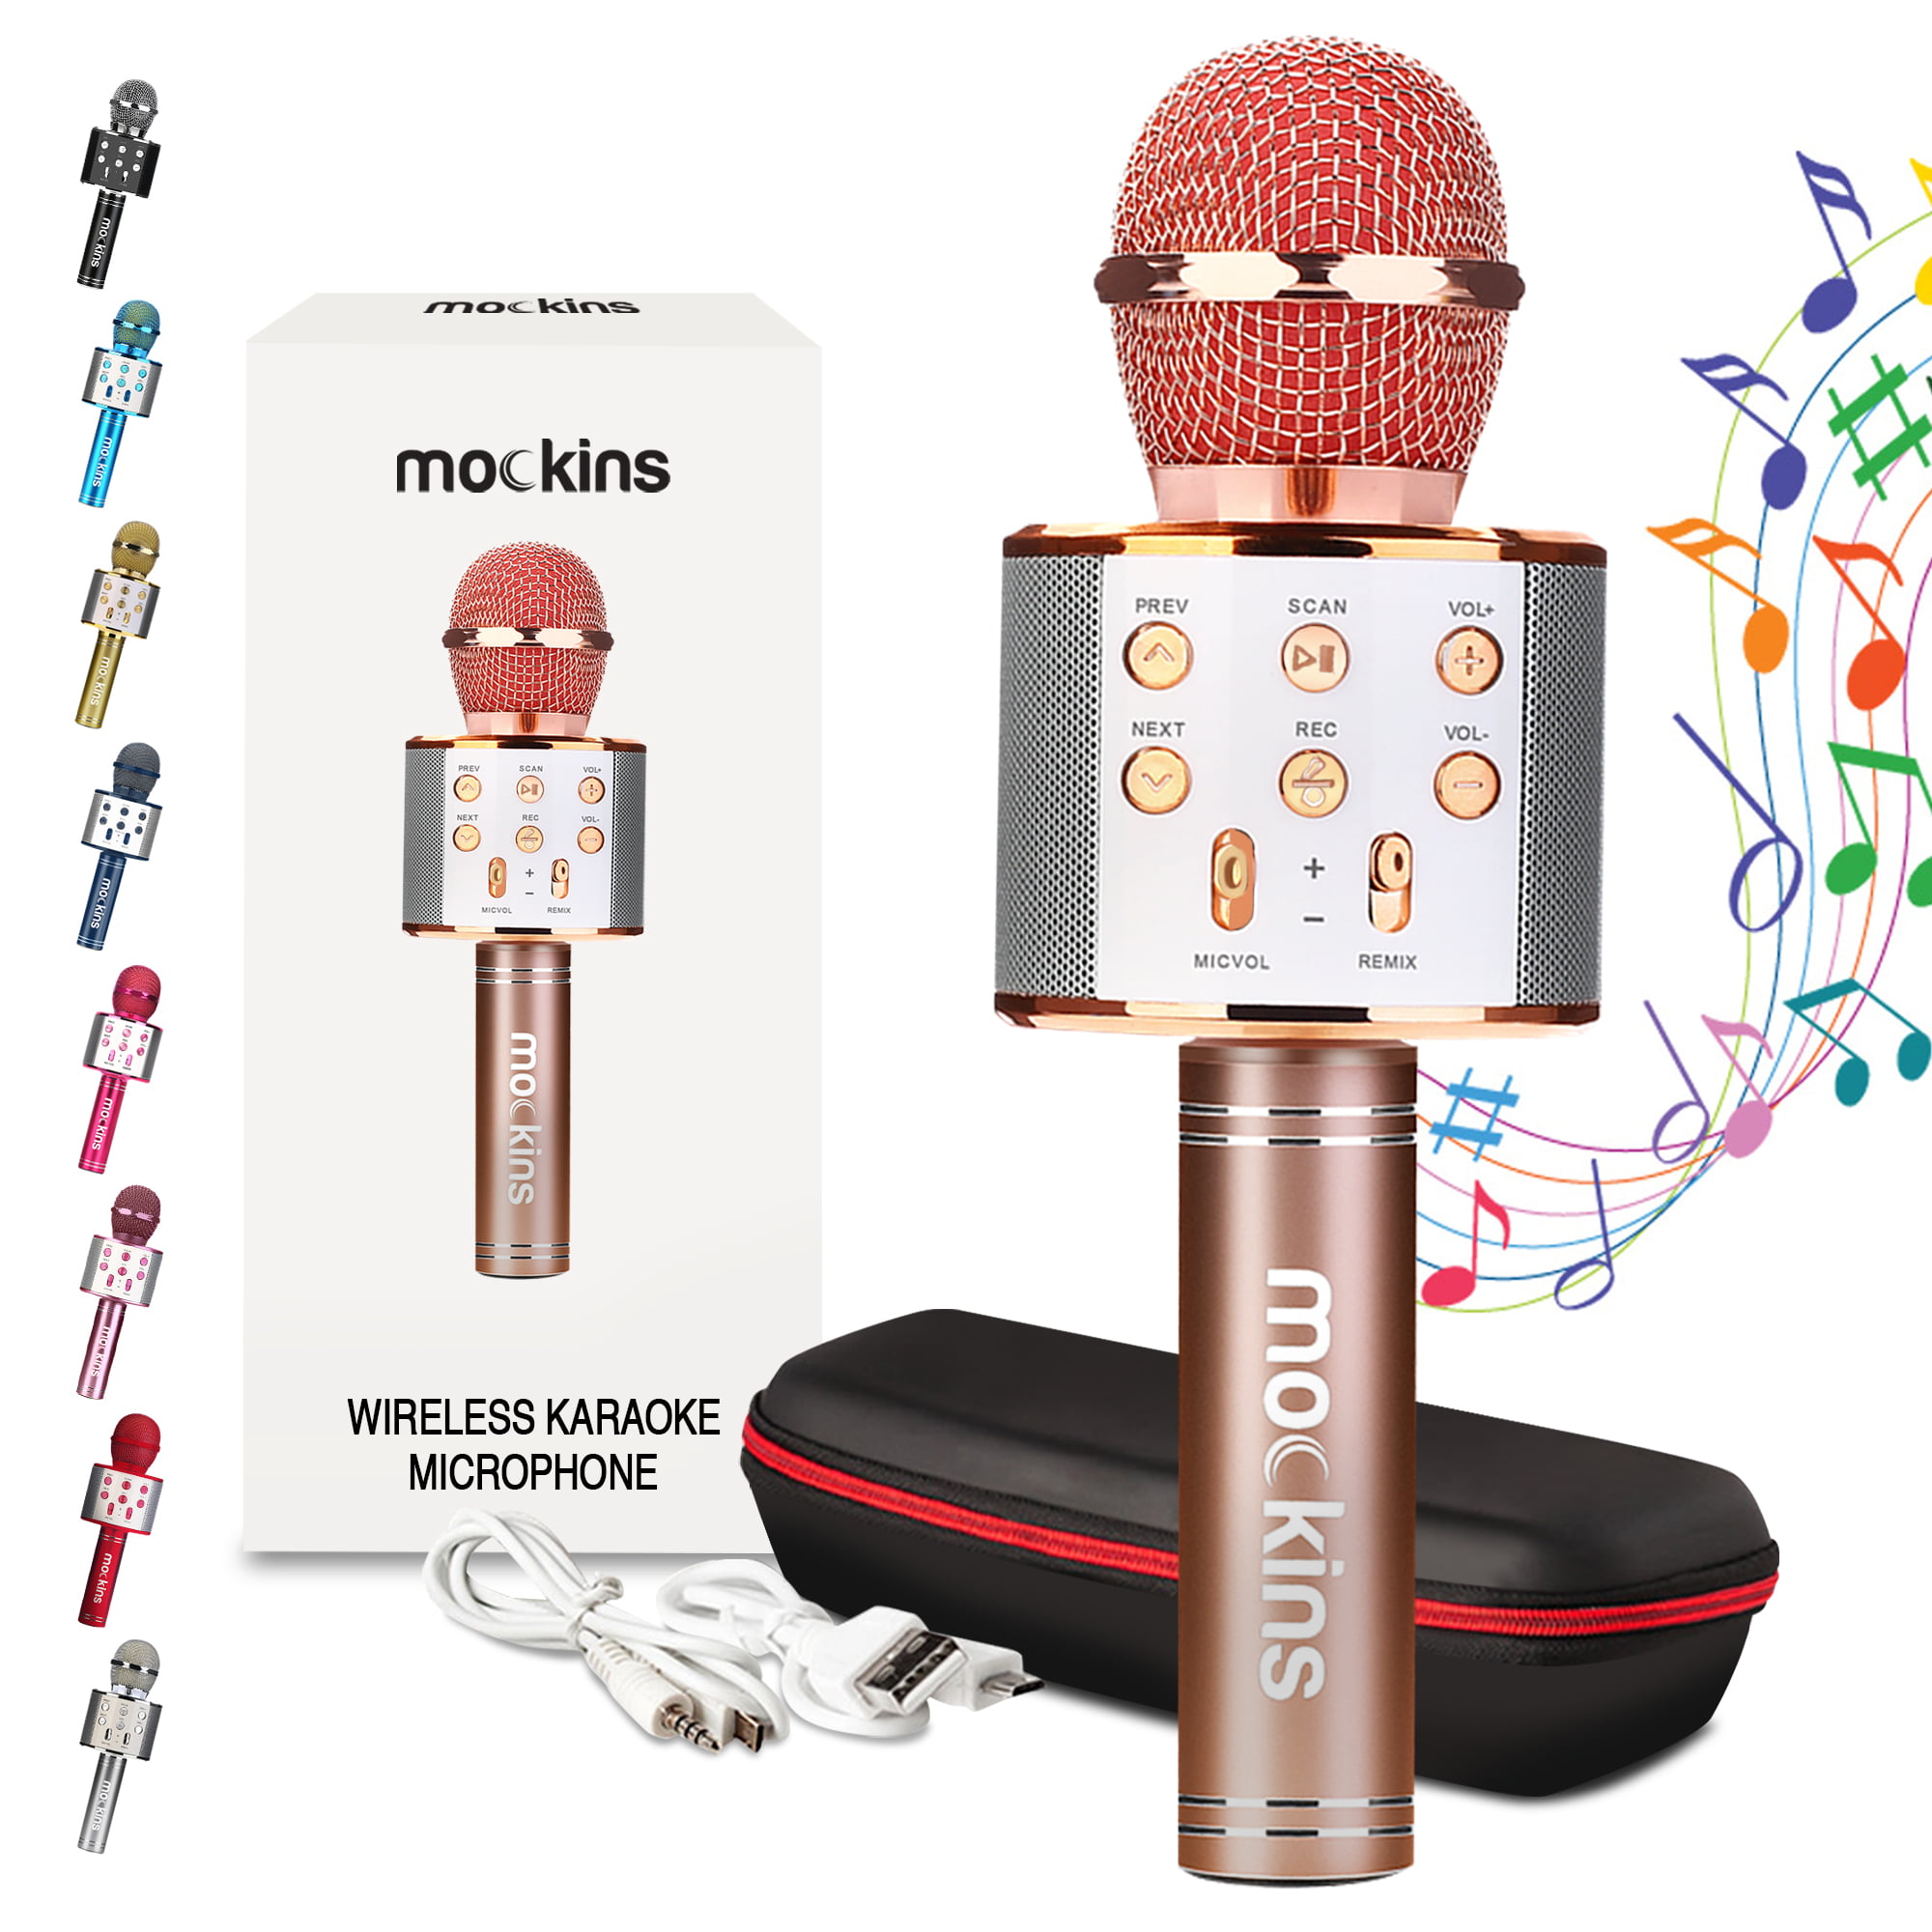 Wireless Bluetooth Karaoke Microphone with Dual Stereo Speaker for Cell Phone Tablet PC Portable Handheld Singing Machine Gifts 2020 Upgraded Rose Gold